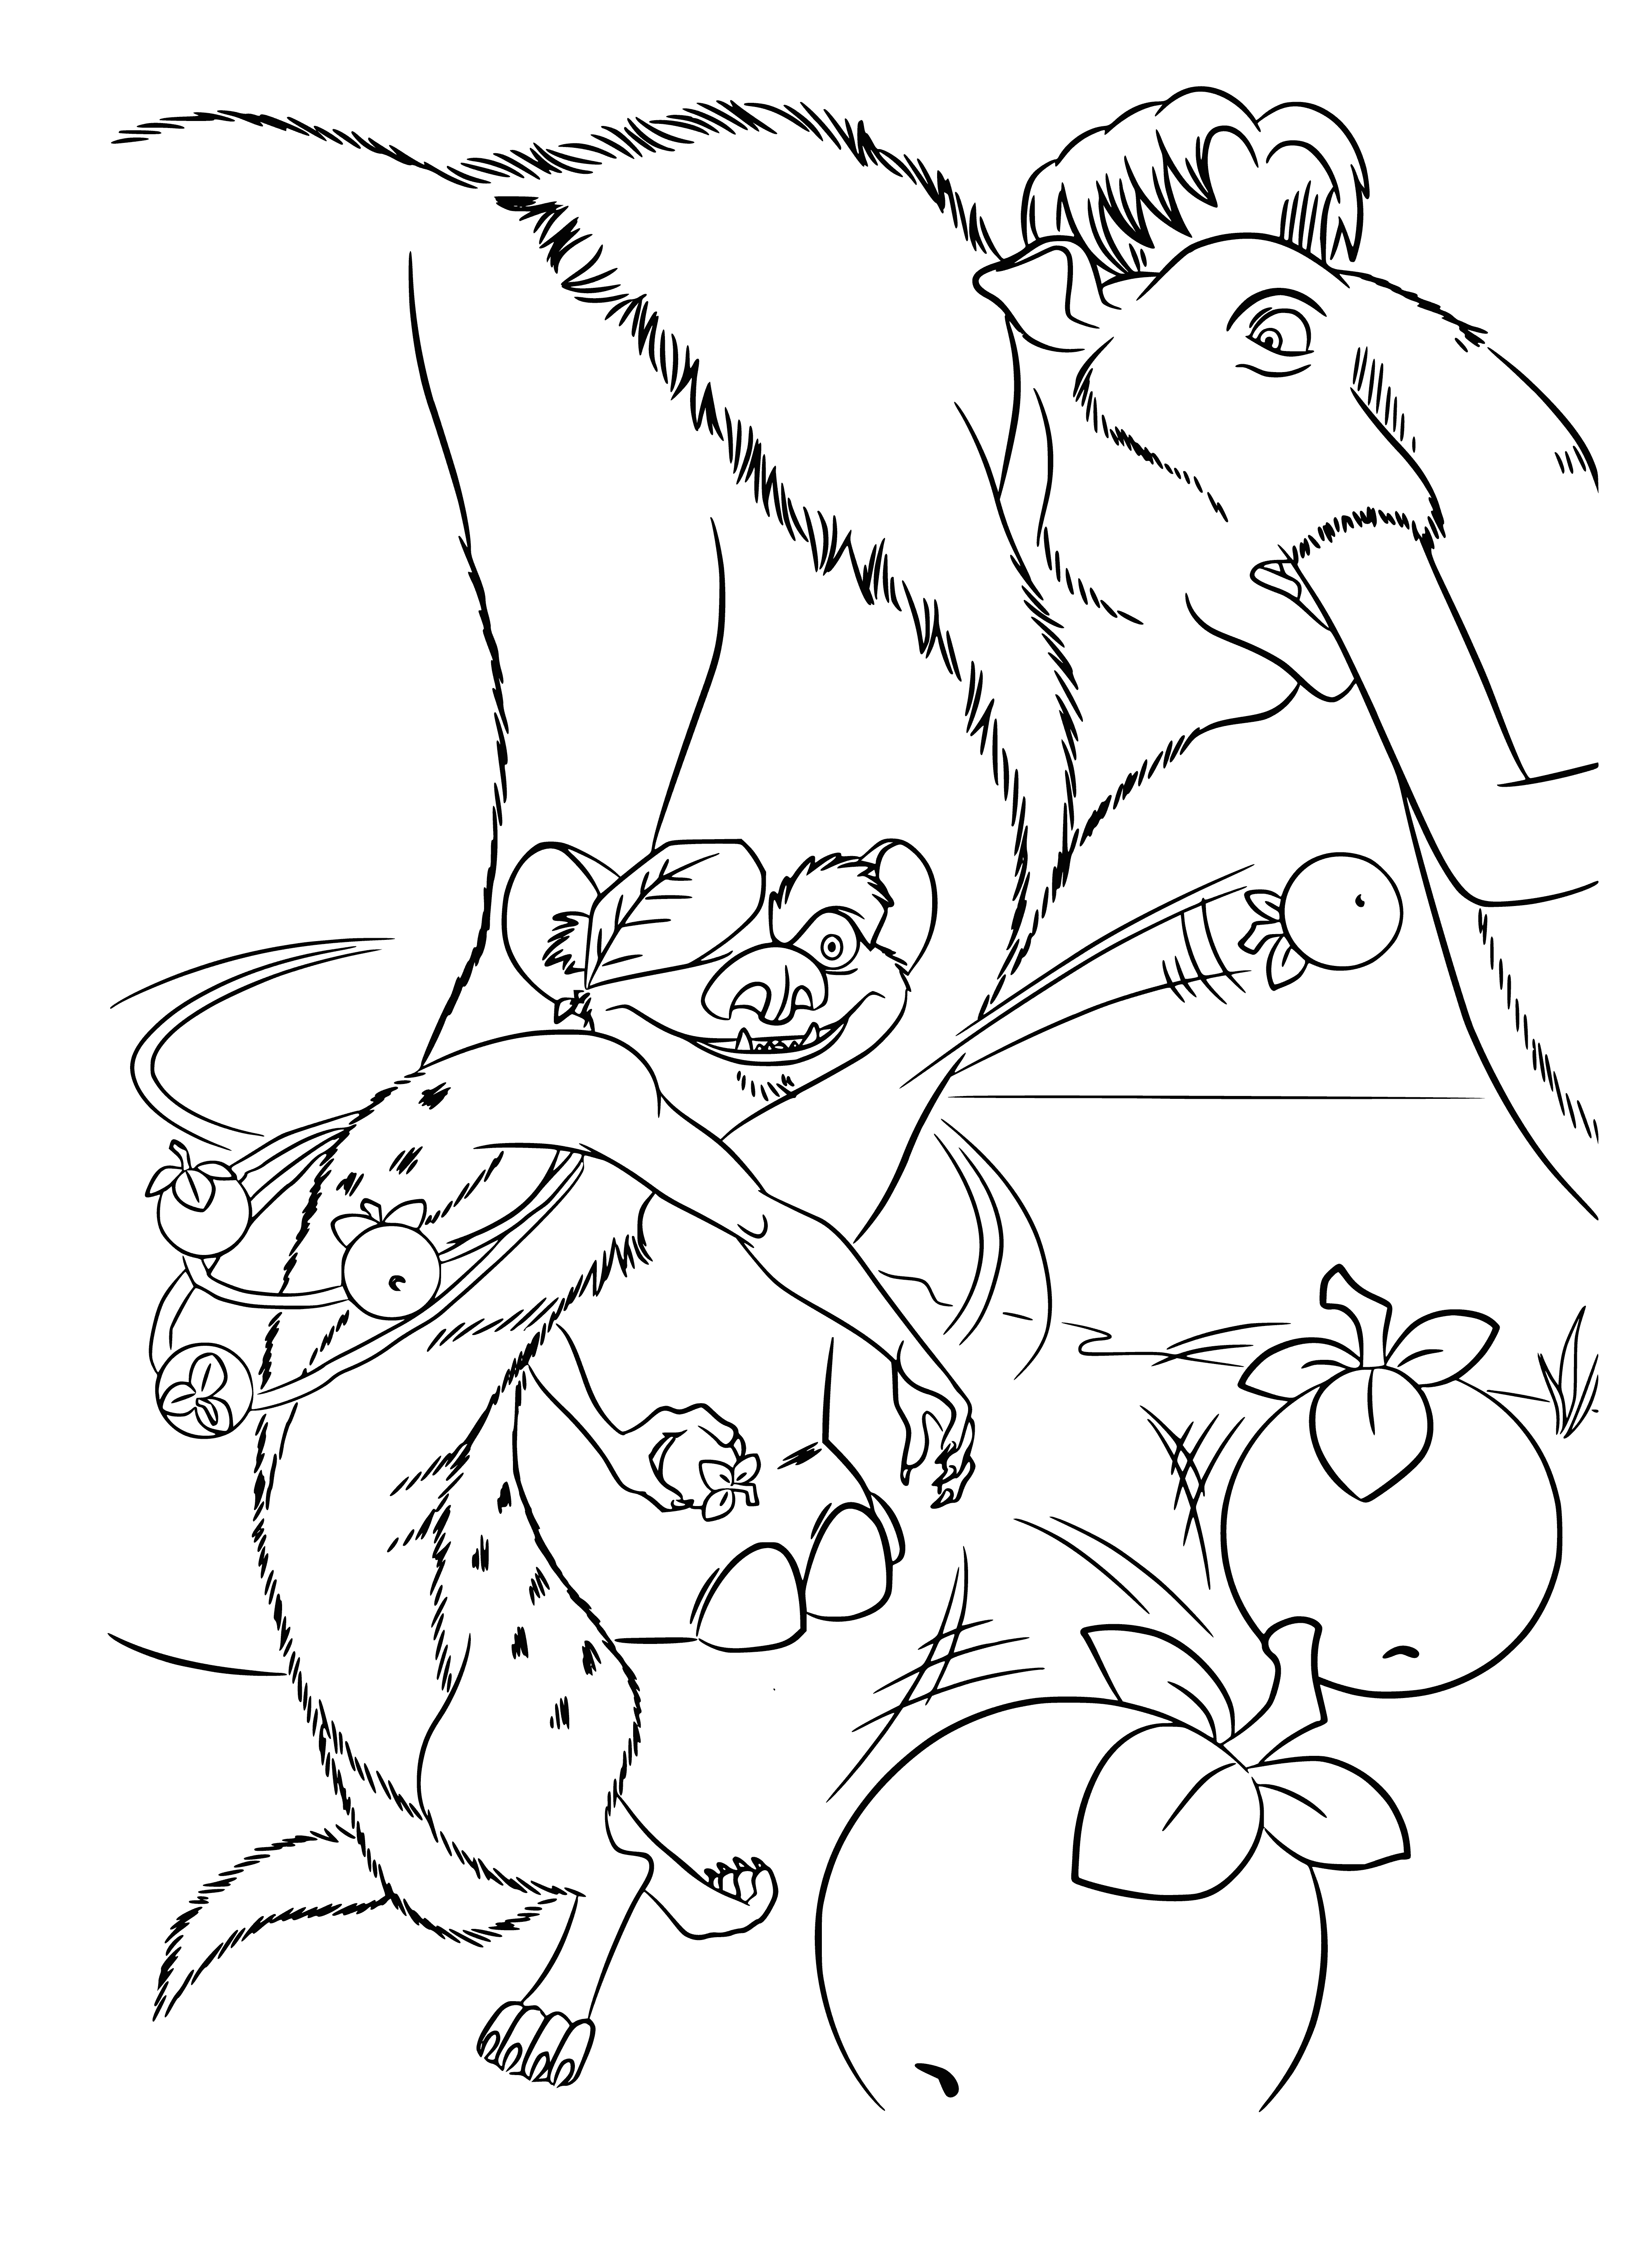 Tank with grenades coloring page